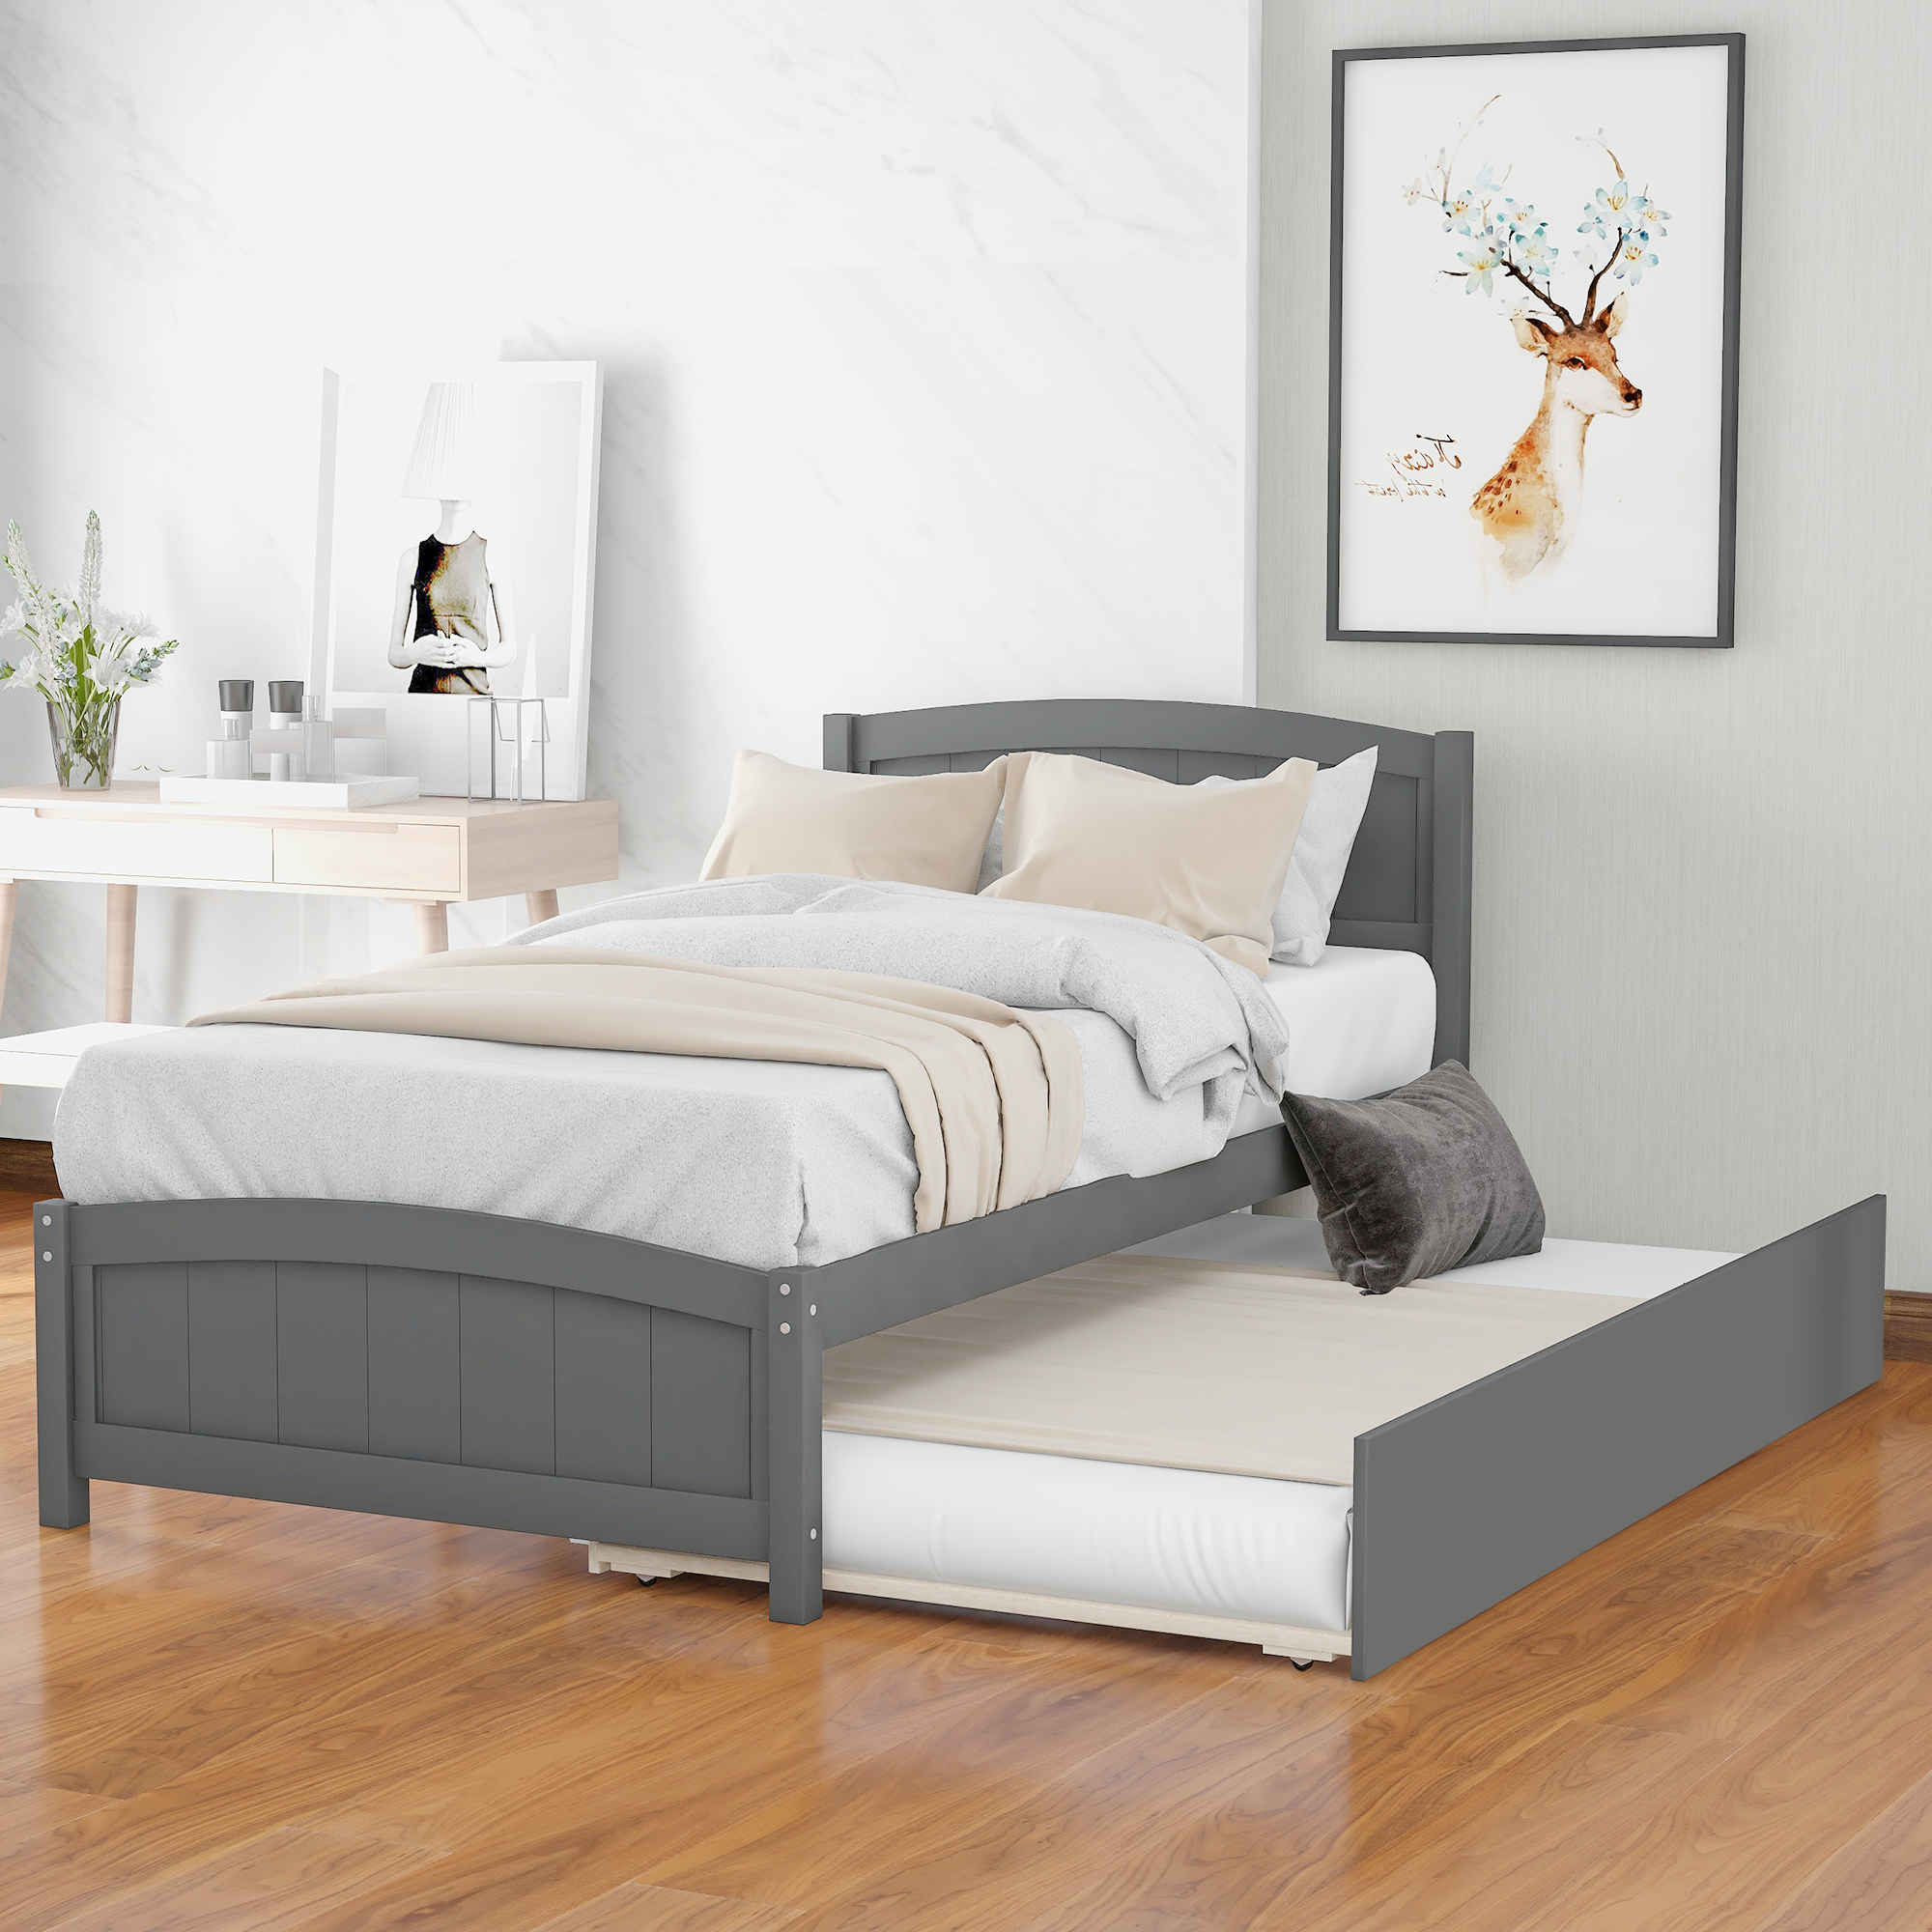 Details about   Twin/Full Size Daybed Bed Full Platform Bed Wood Bed Frame Guest Bed White/Gray 